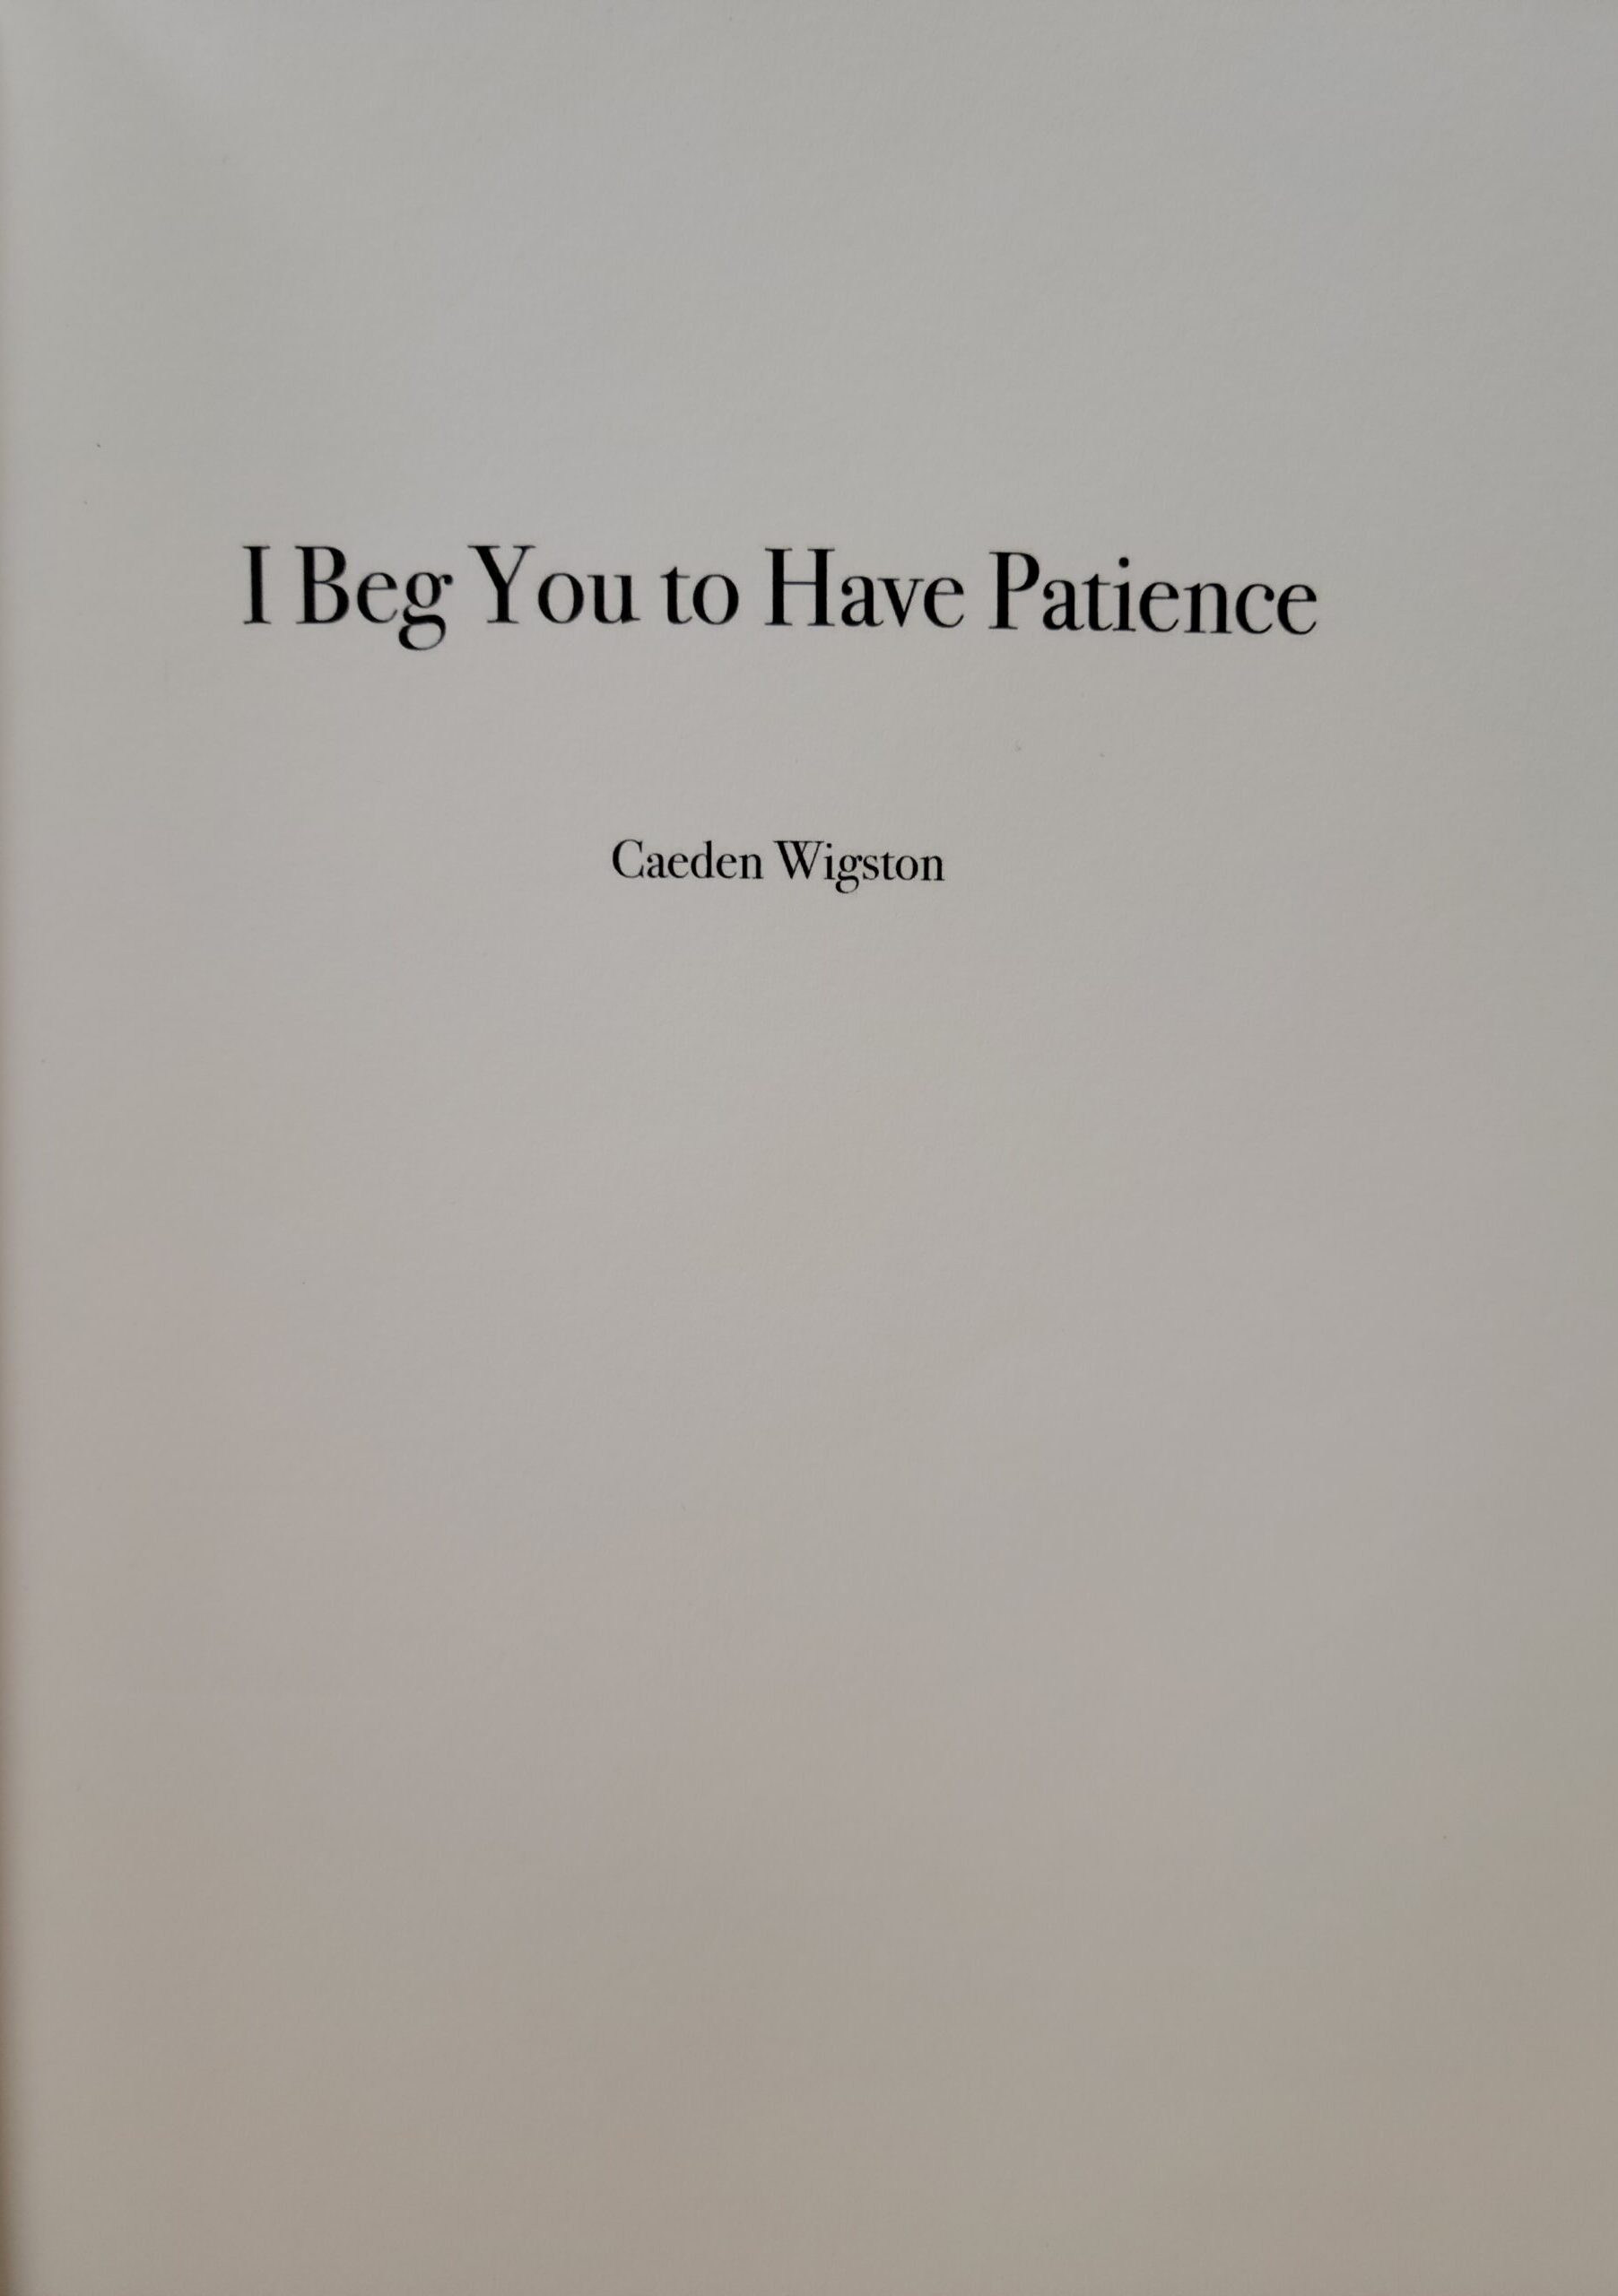 Photograph of front page of book I Beg You To Have Patience by Caeden Wigston